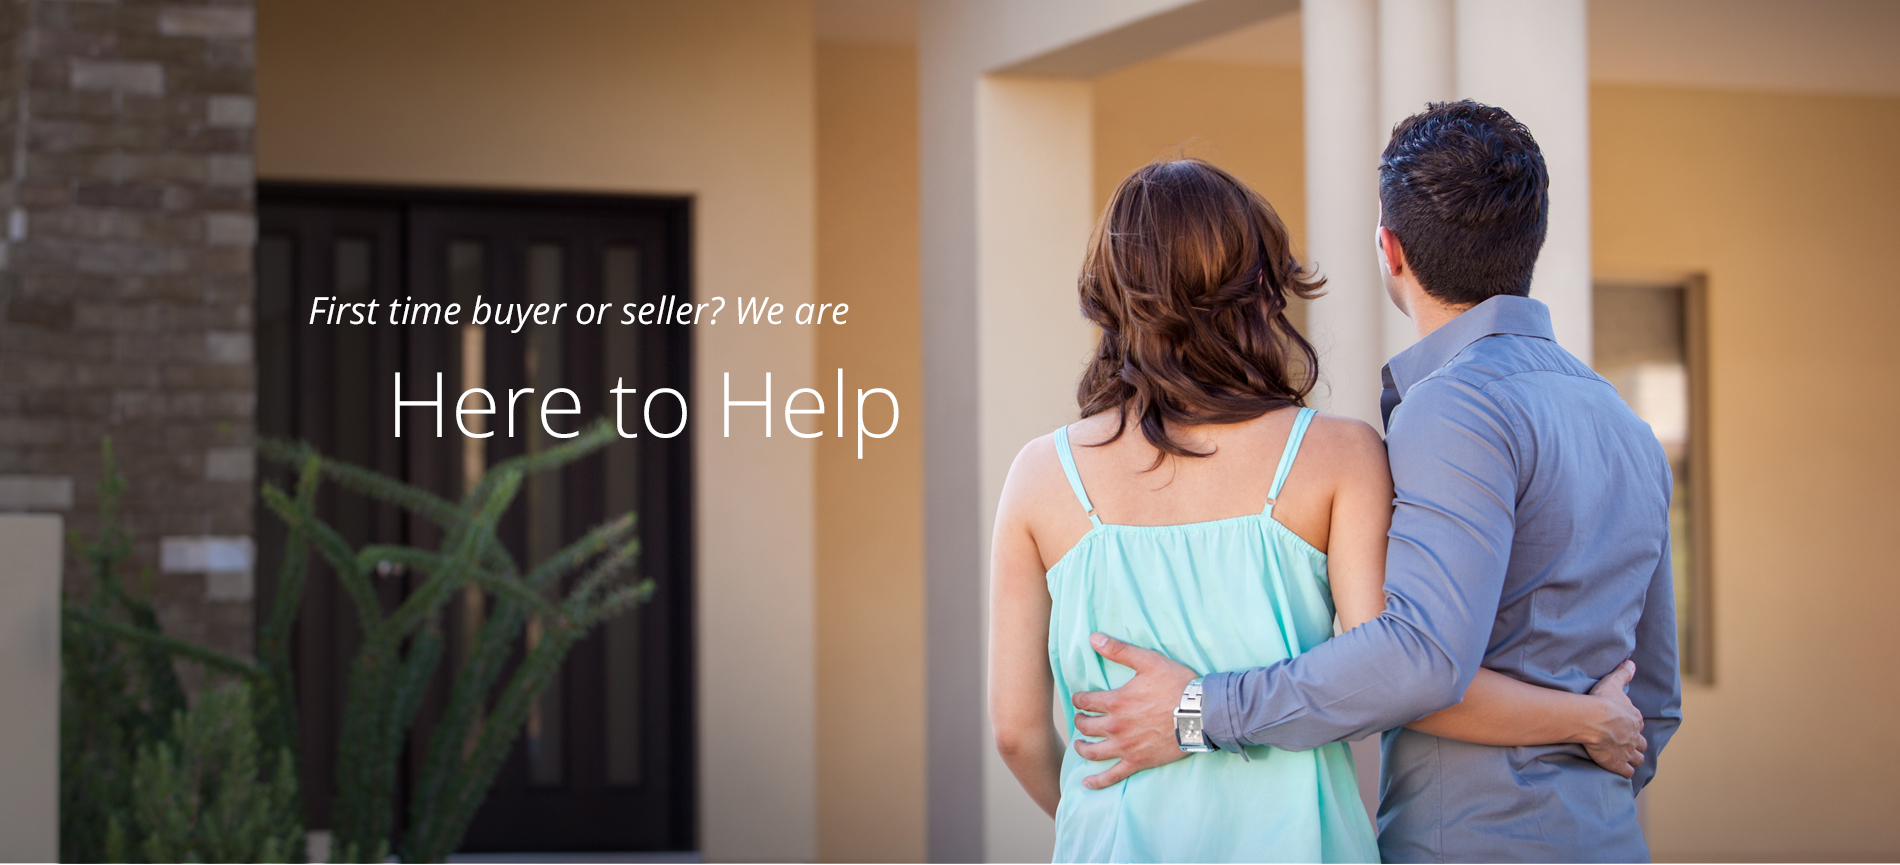 First time buyer or sell? We are here to help.